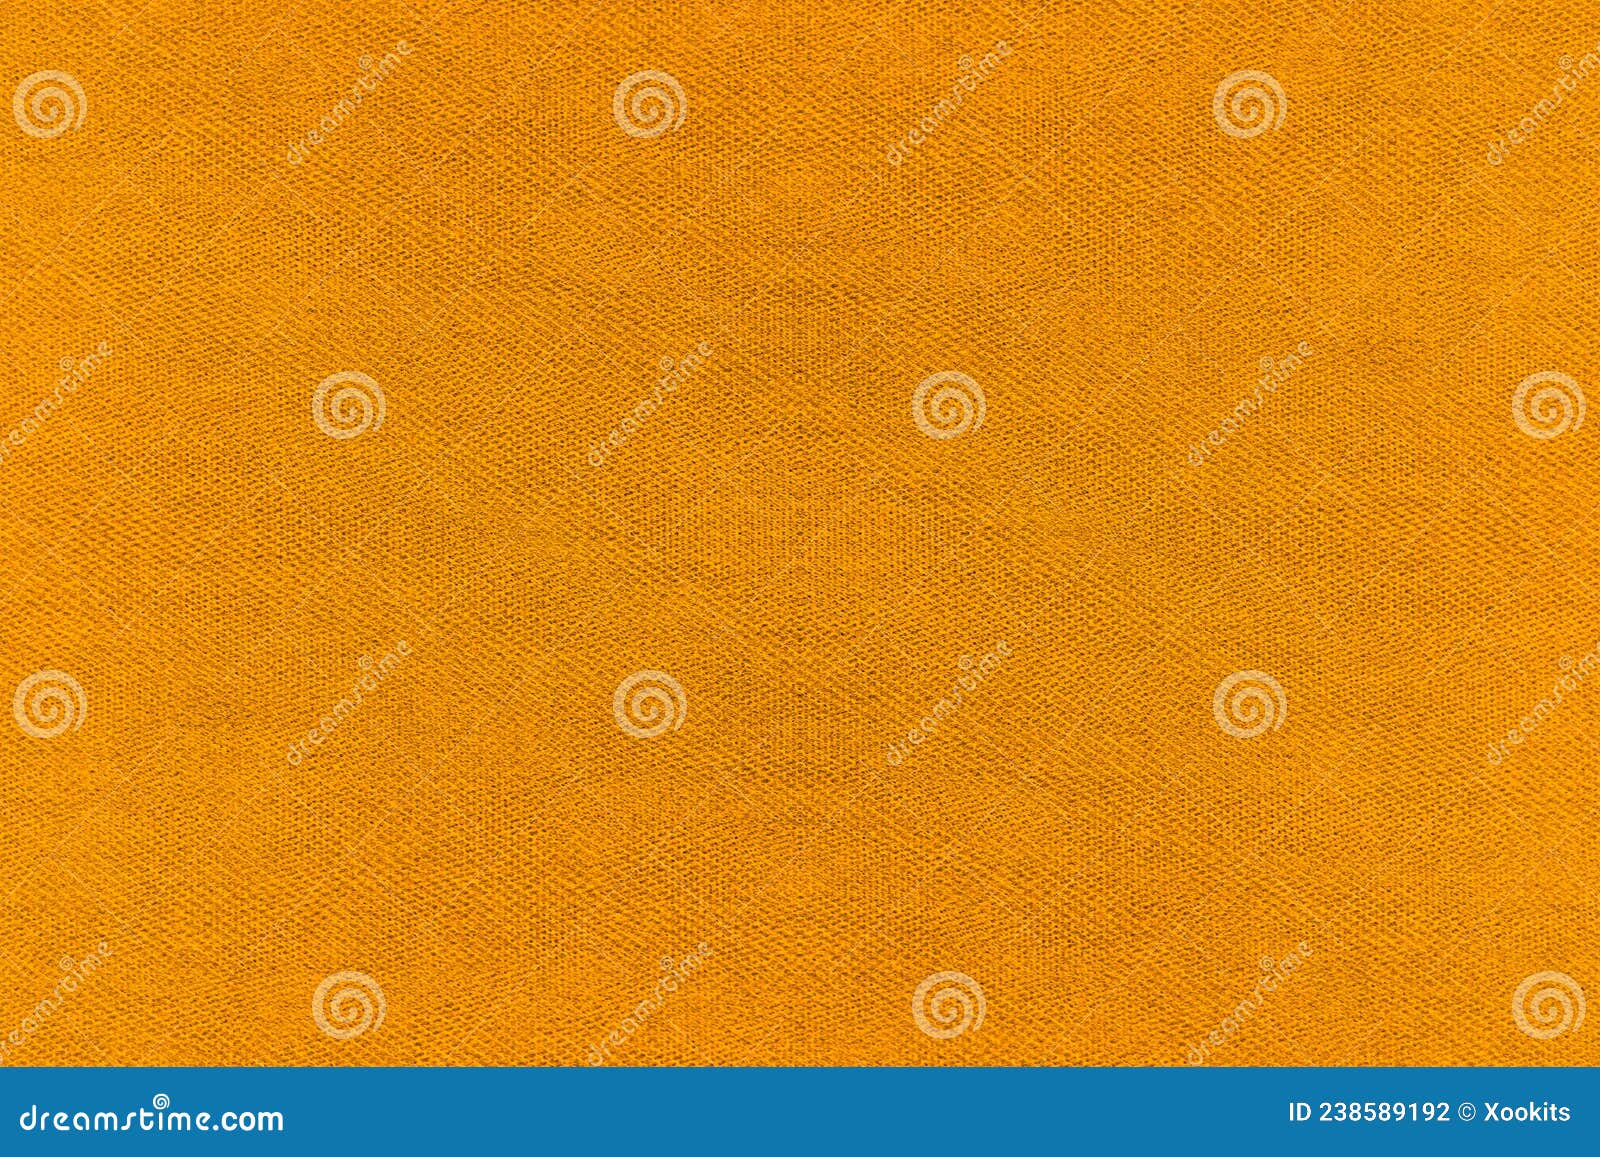 Abstract Rough Grunge Texture of Dark Yellow Color Carpet for ...